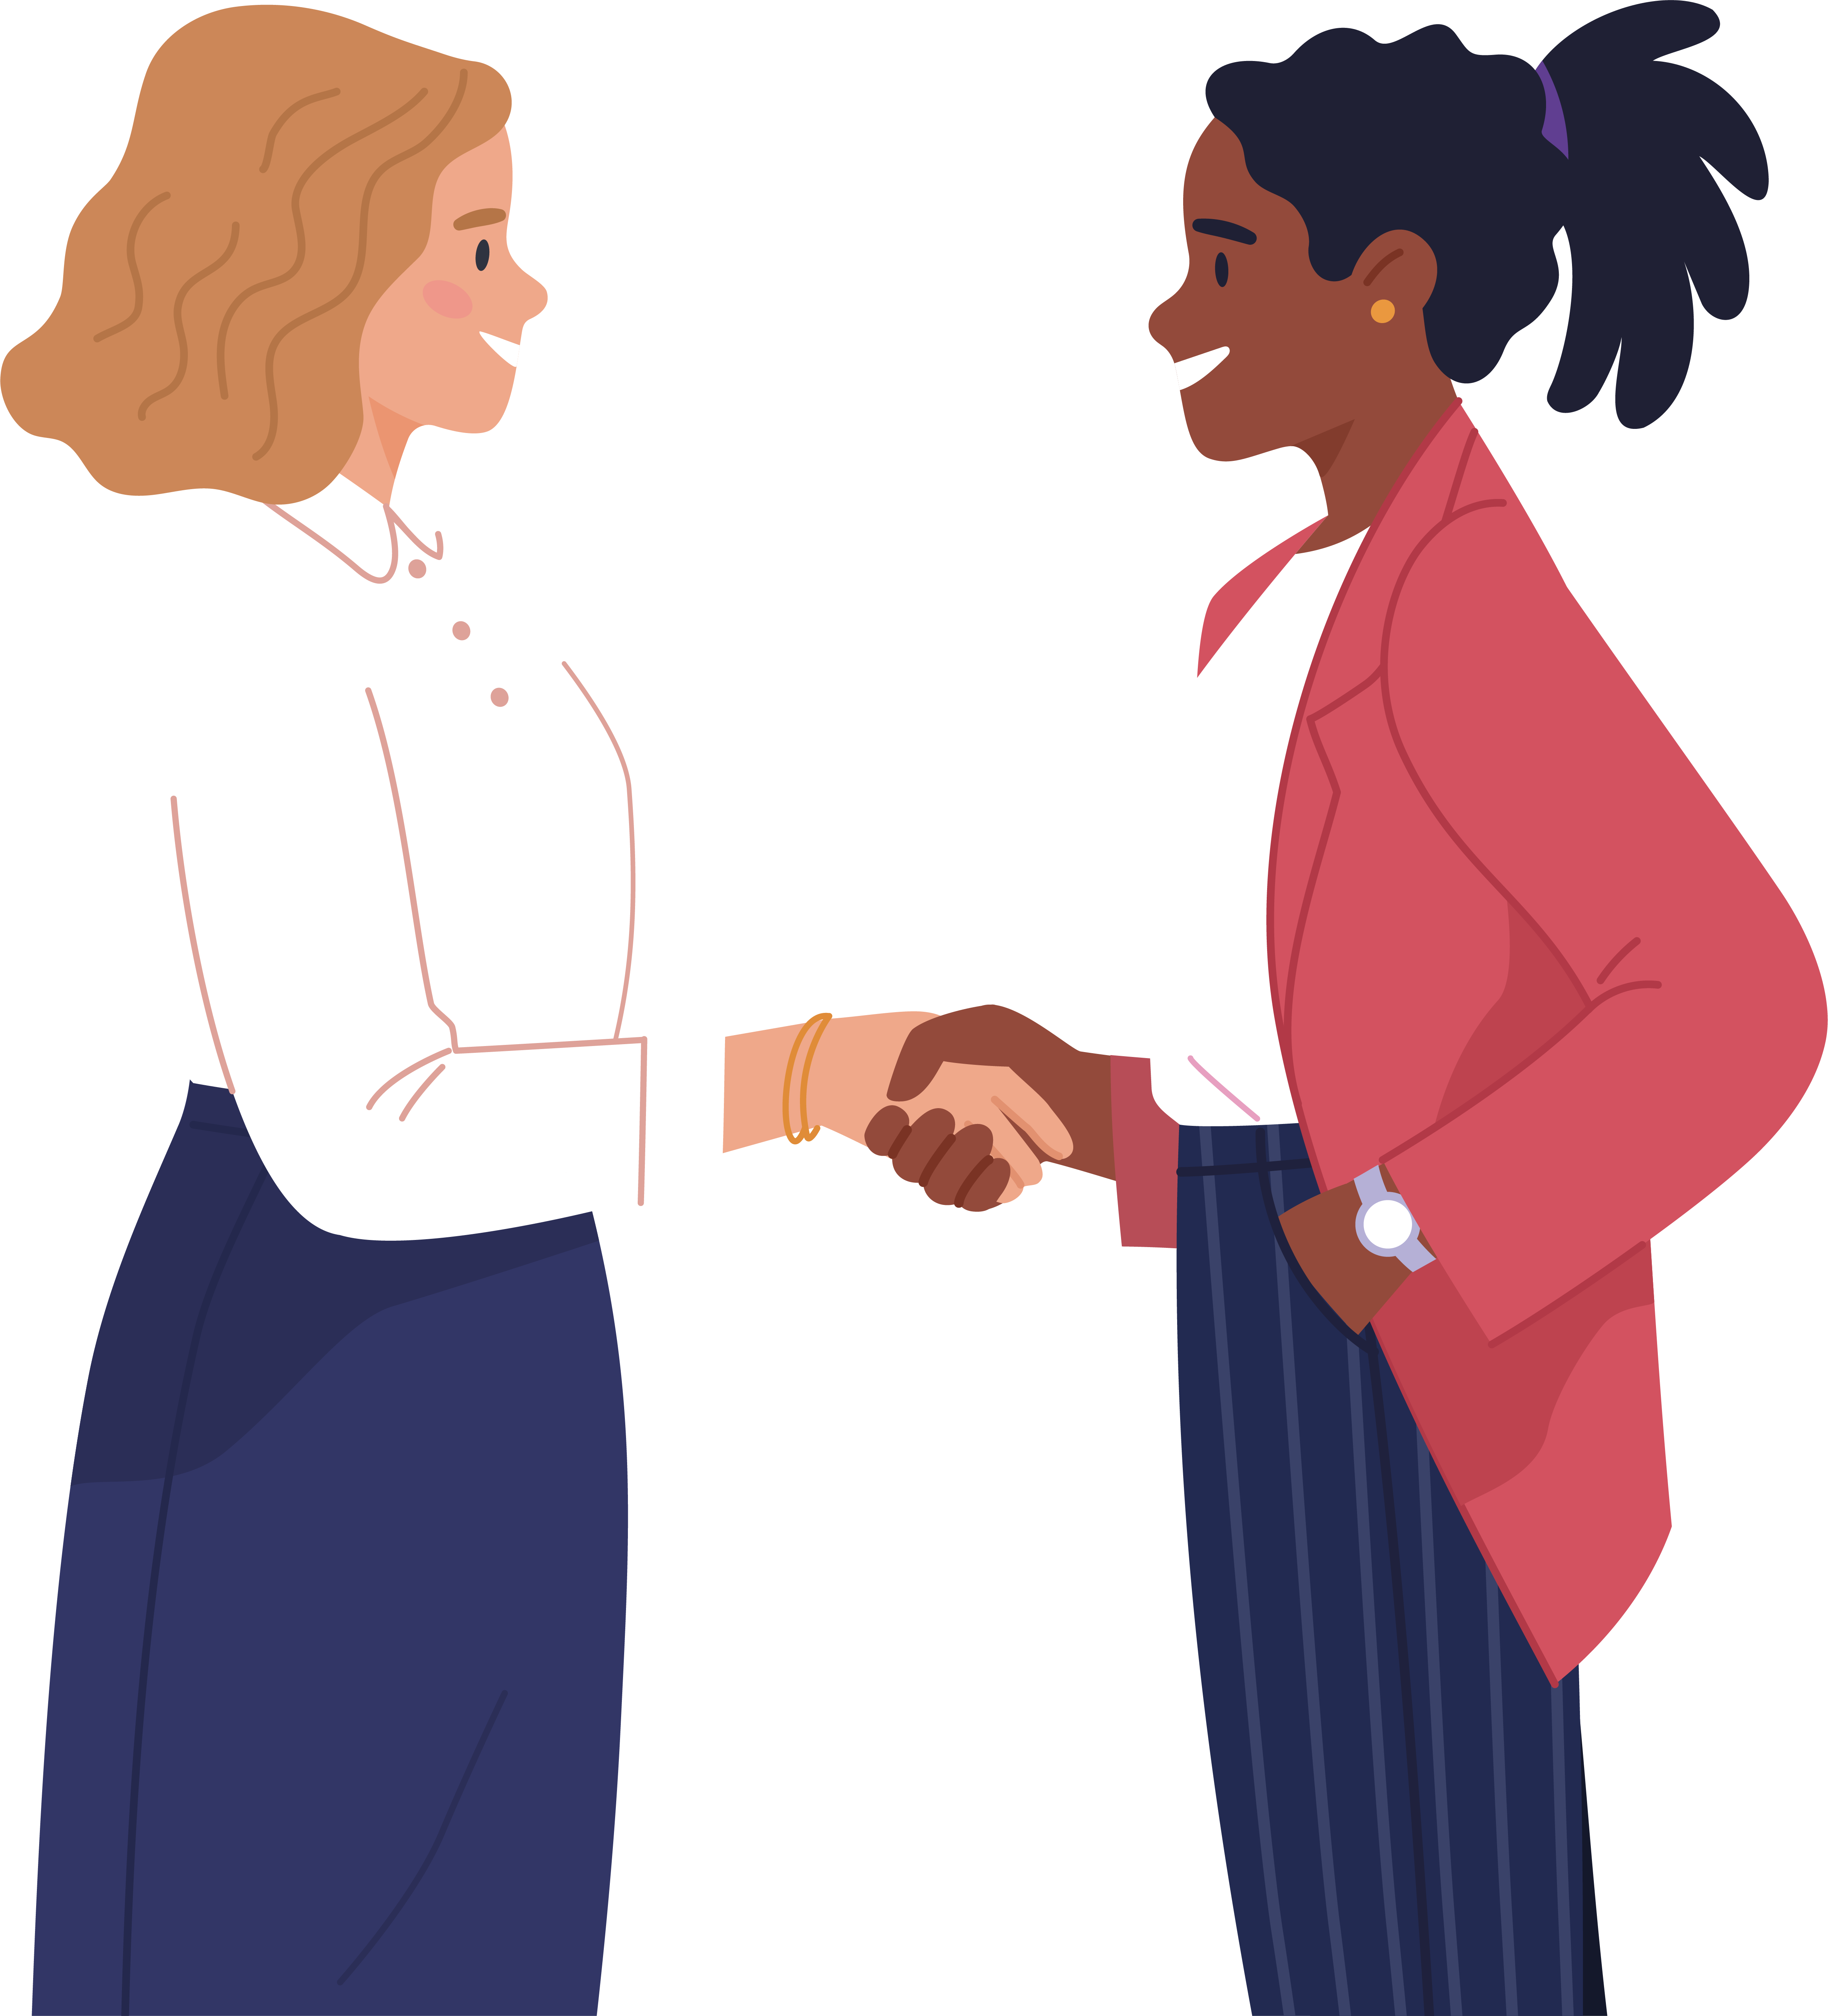 Two businesswomen shaking hands and smiling at one another